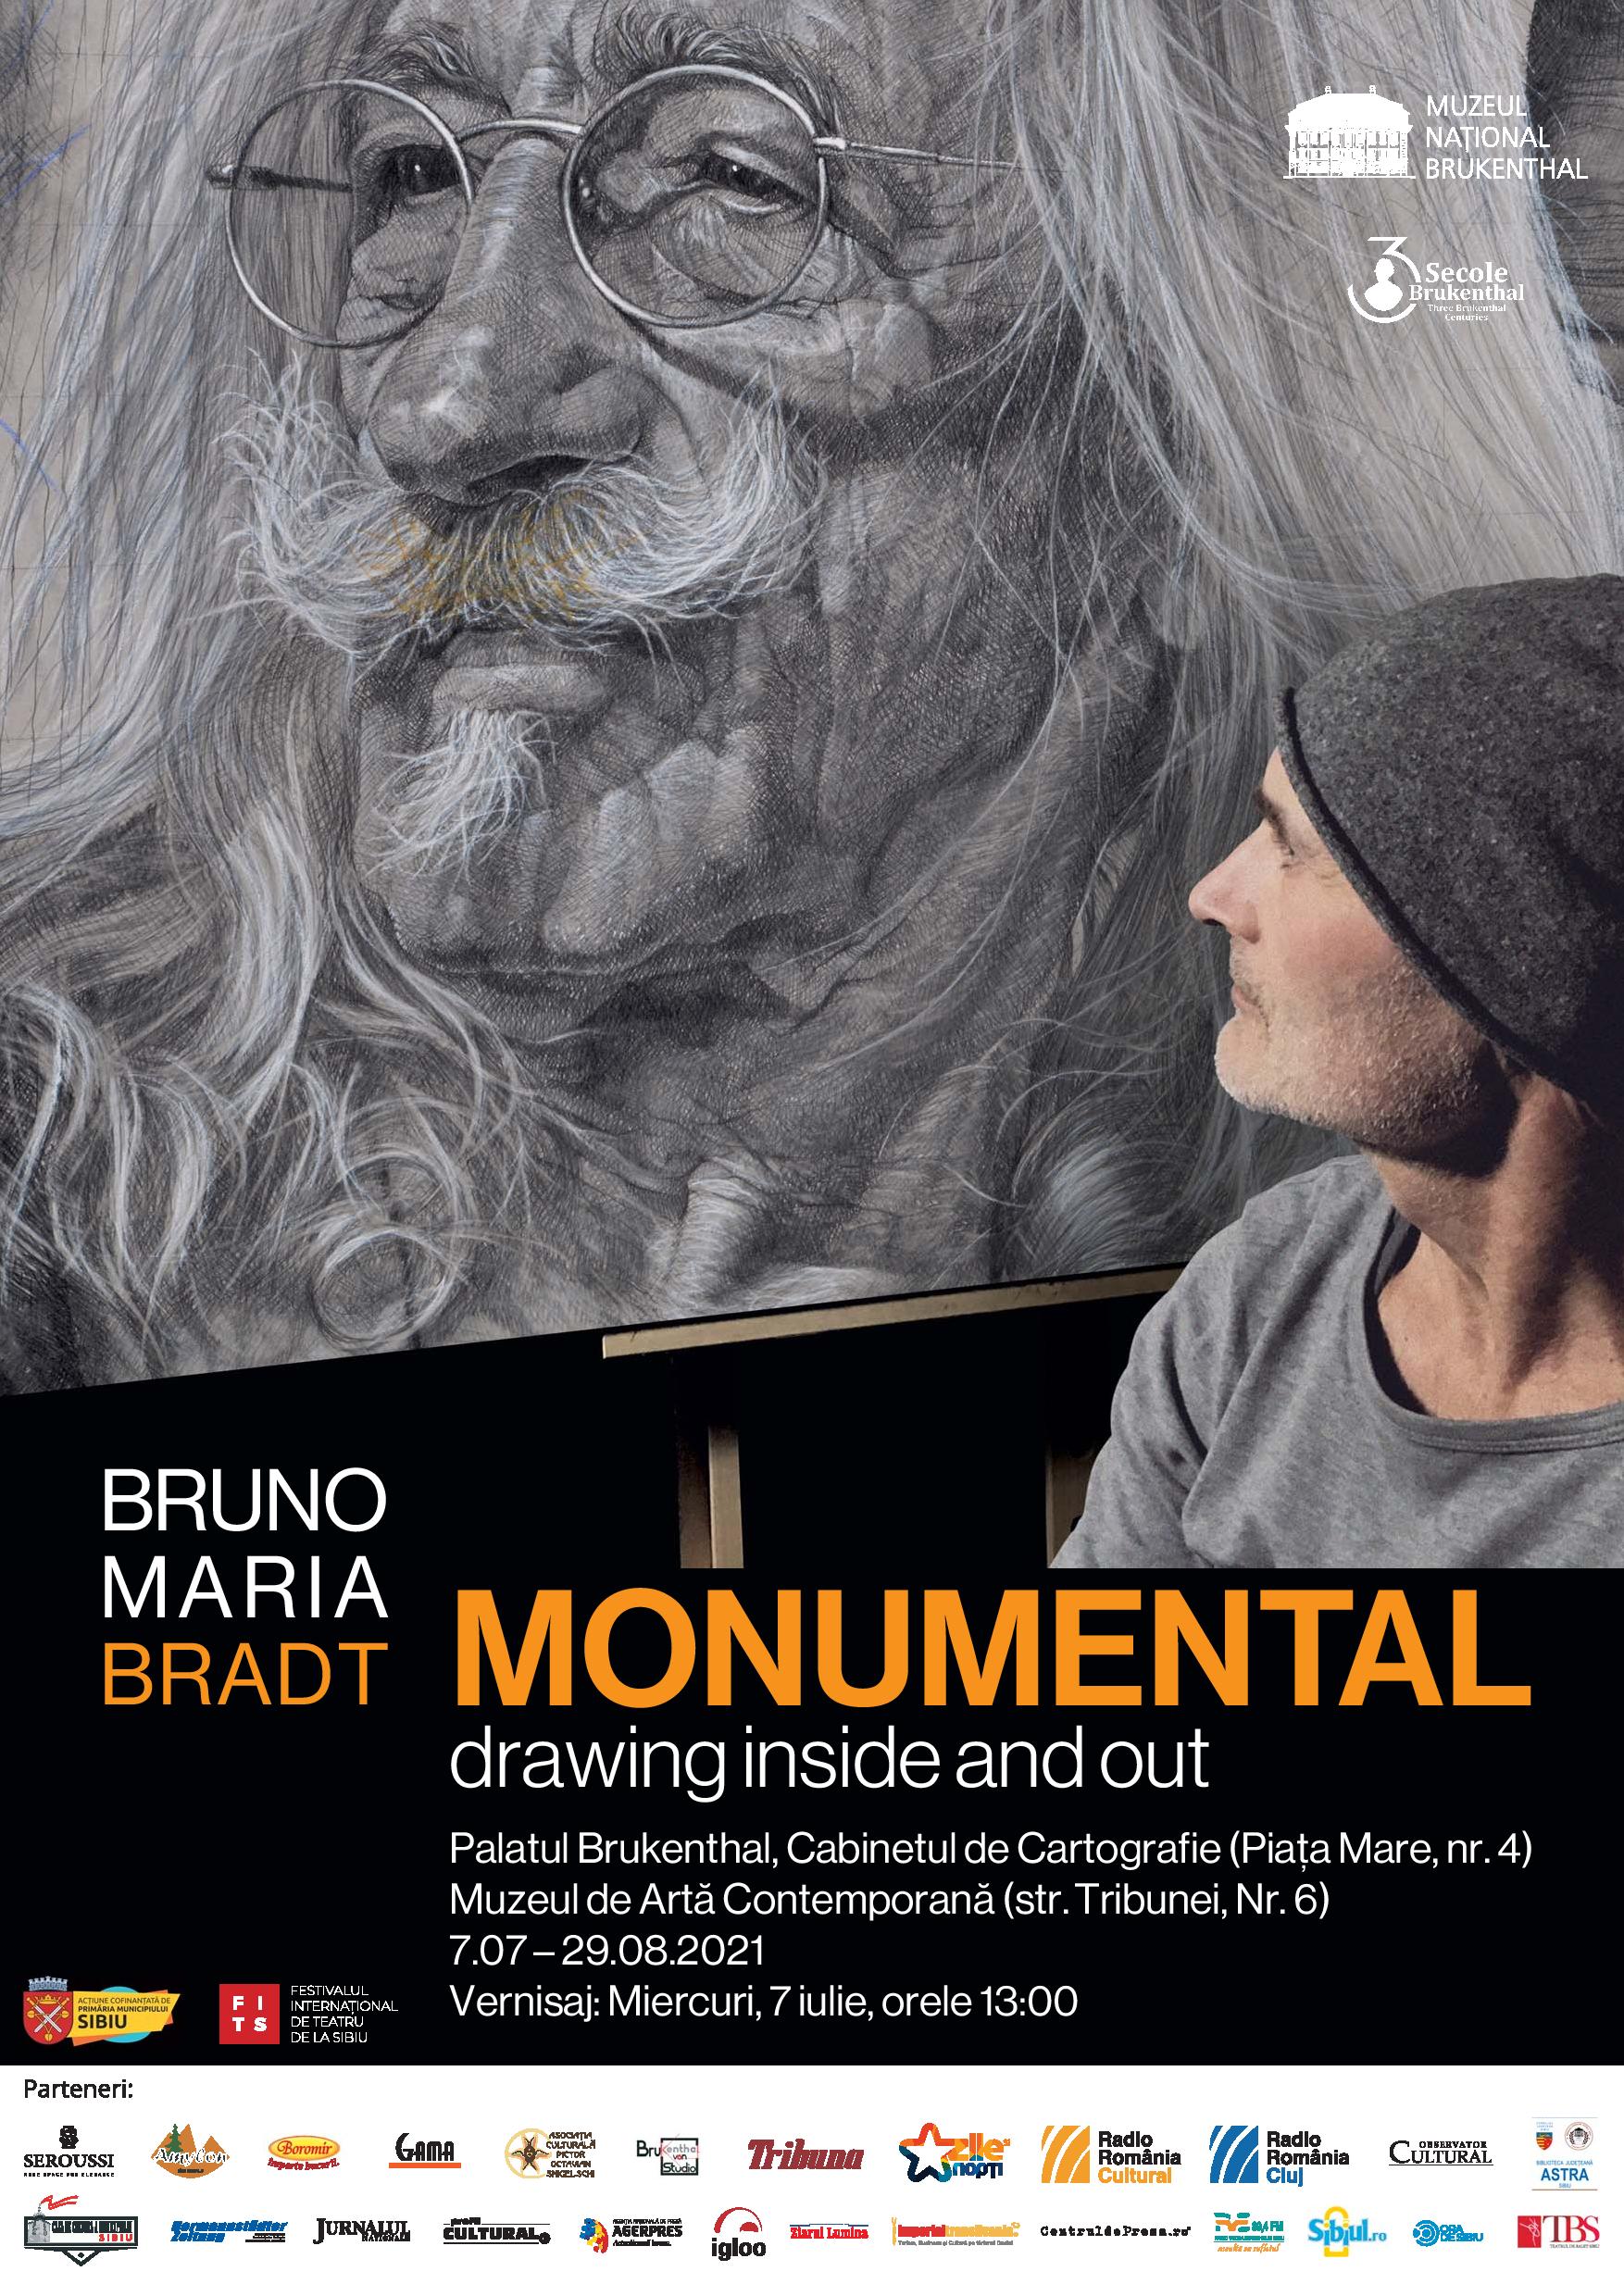 Bruno Maria Bradt: Monumental - Drawing inside and out